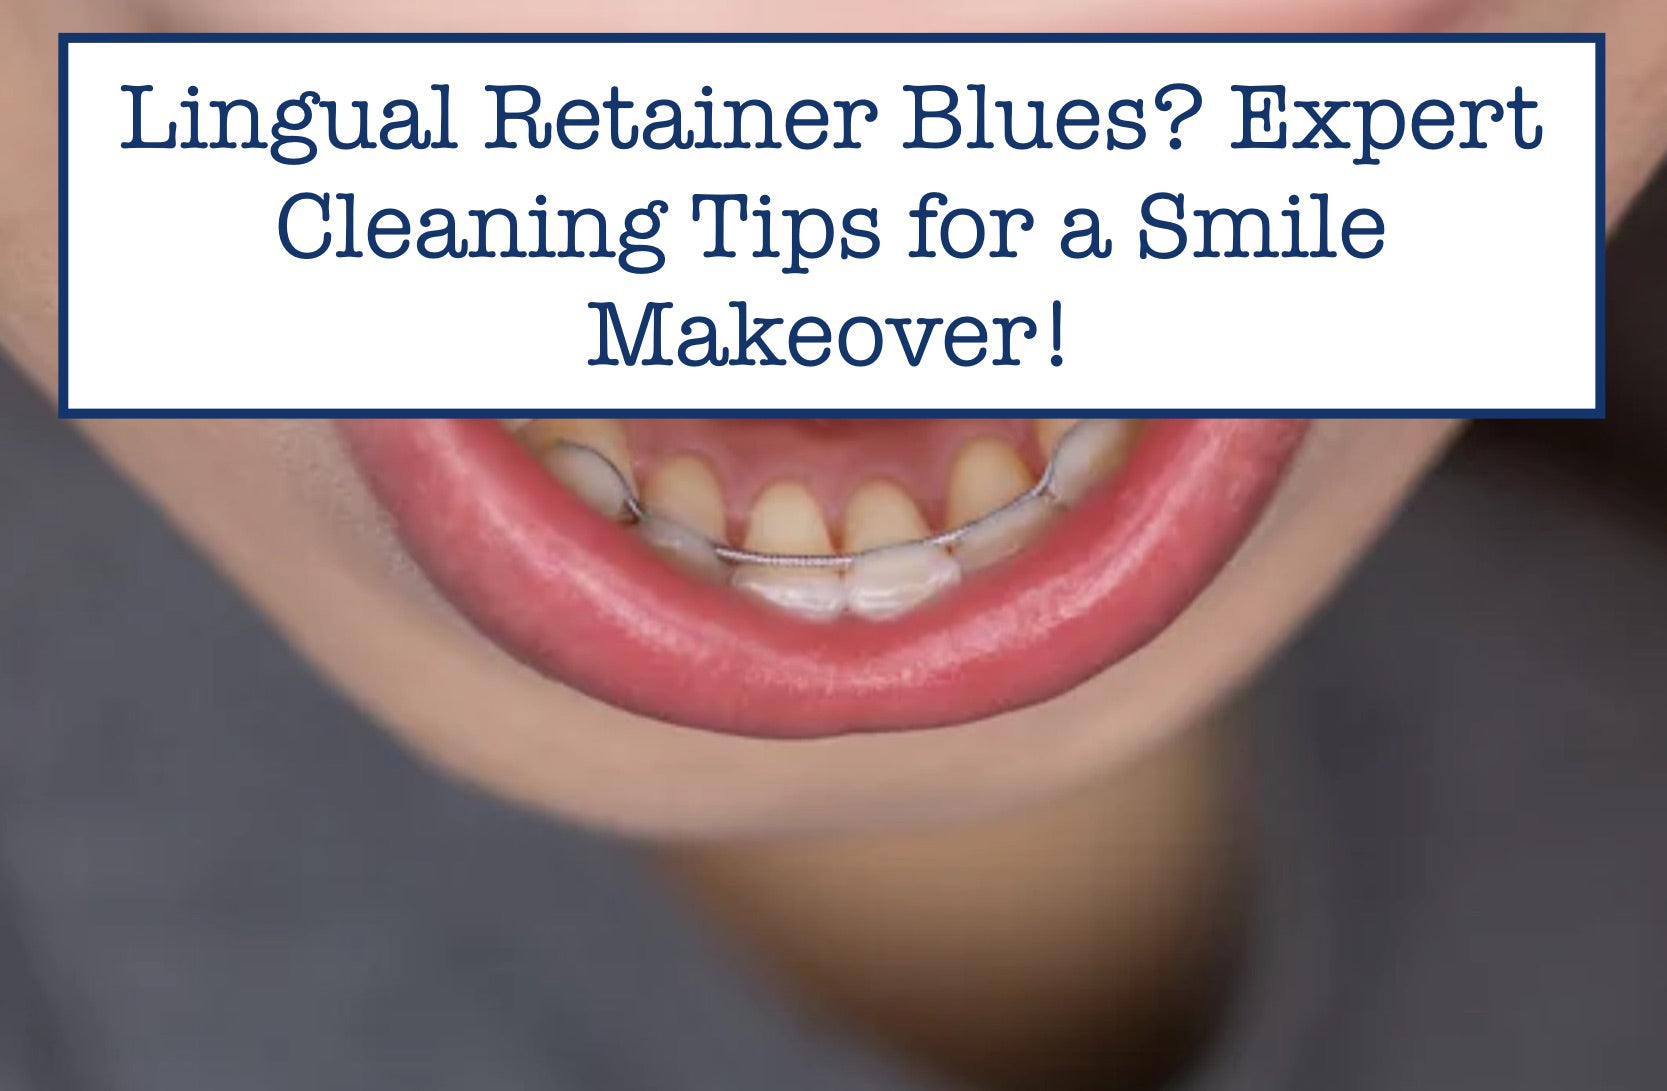 Lingual Retainer Blues? Expert Cleaning Tips for a Smile Makeover!